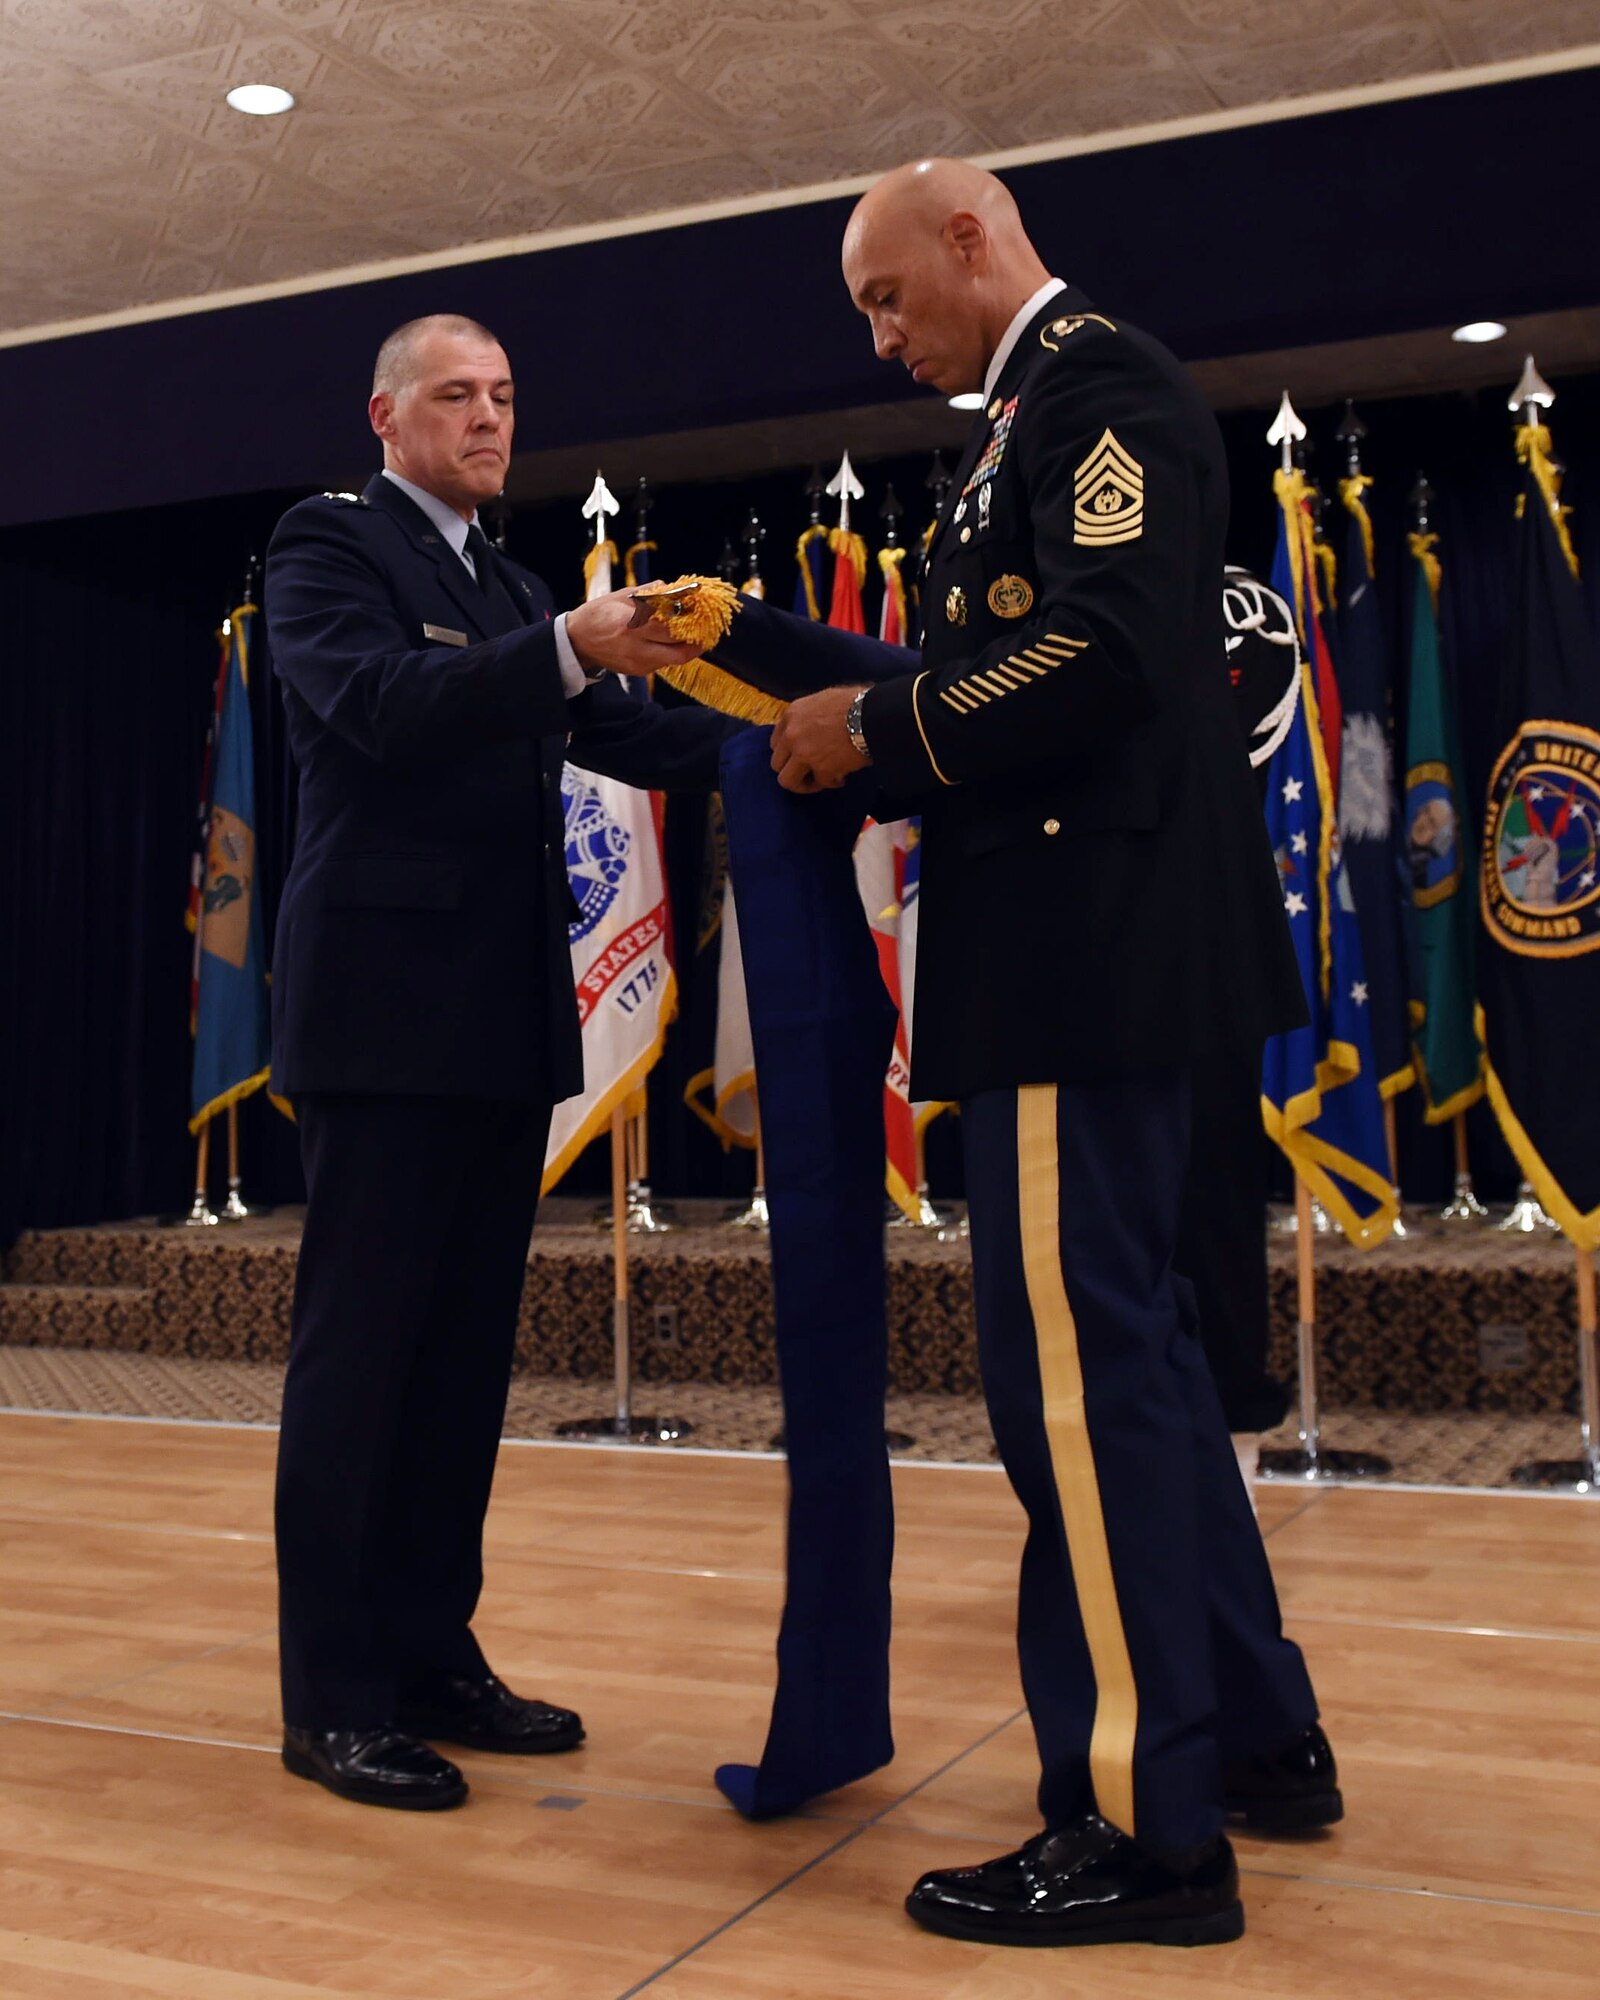 JFCC-GS inactivation ceremony at Offutt AFB, Neb., Oct. 2, 2017.